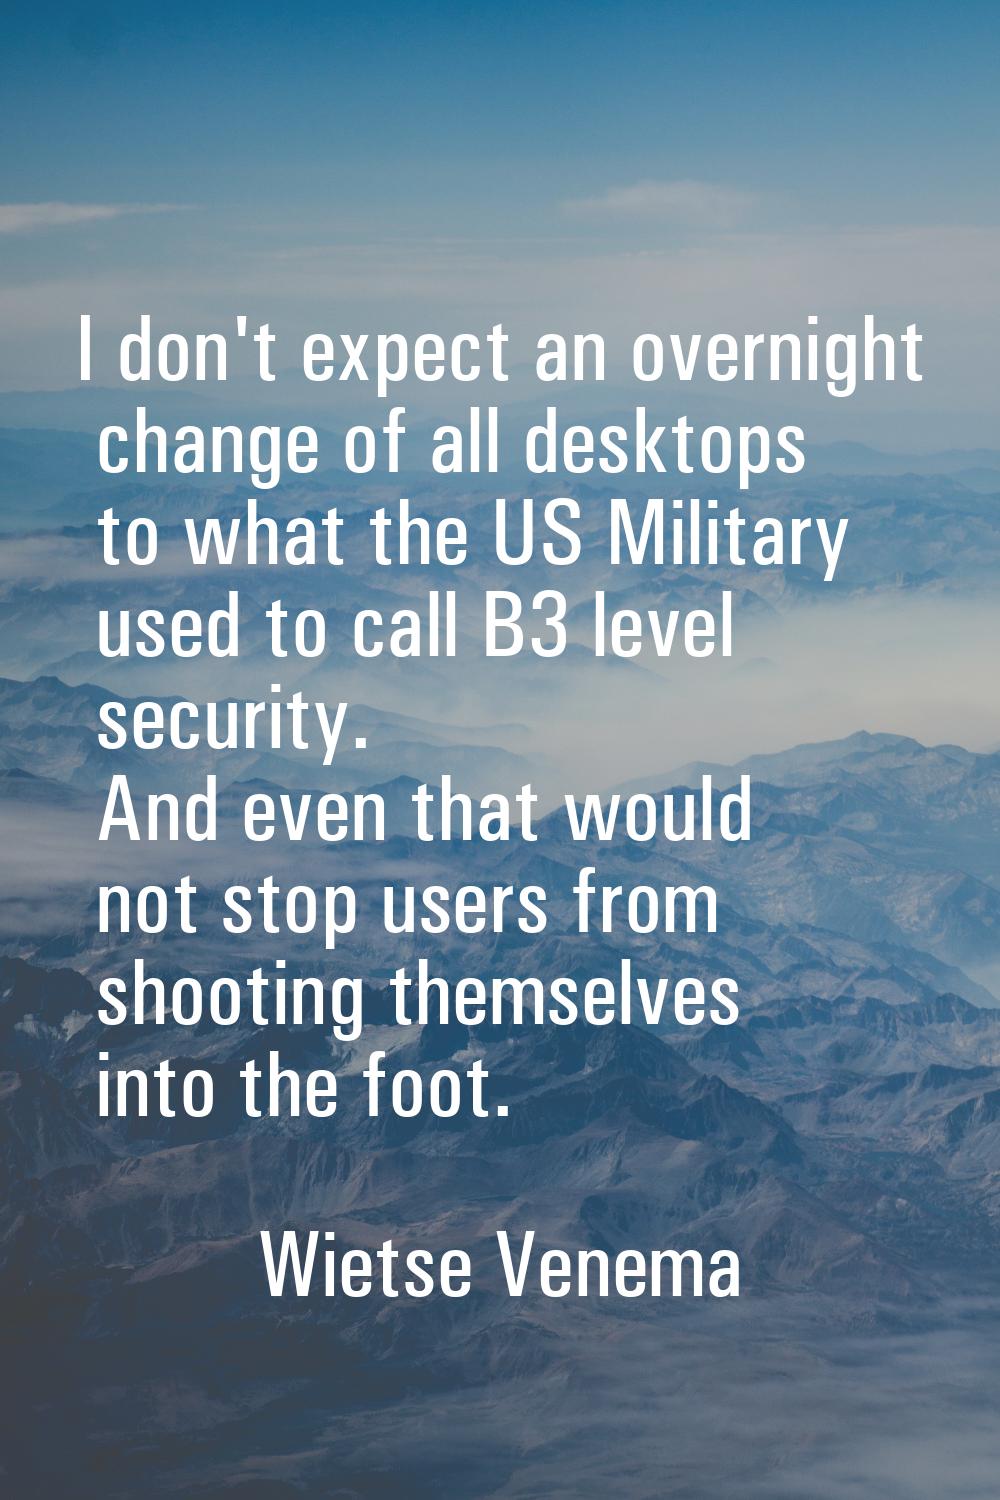 I don't expect an overnight change of all desktops to what the US Military used to call B3 level se